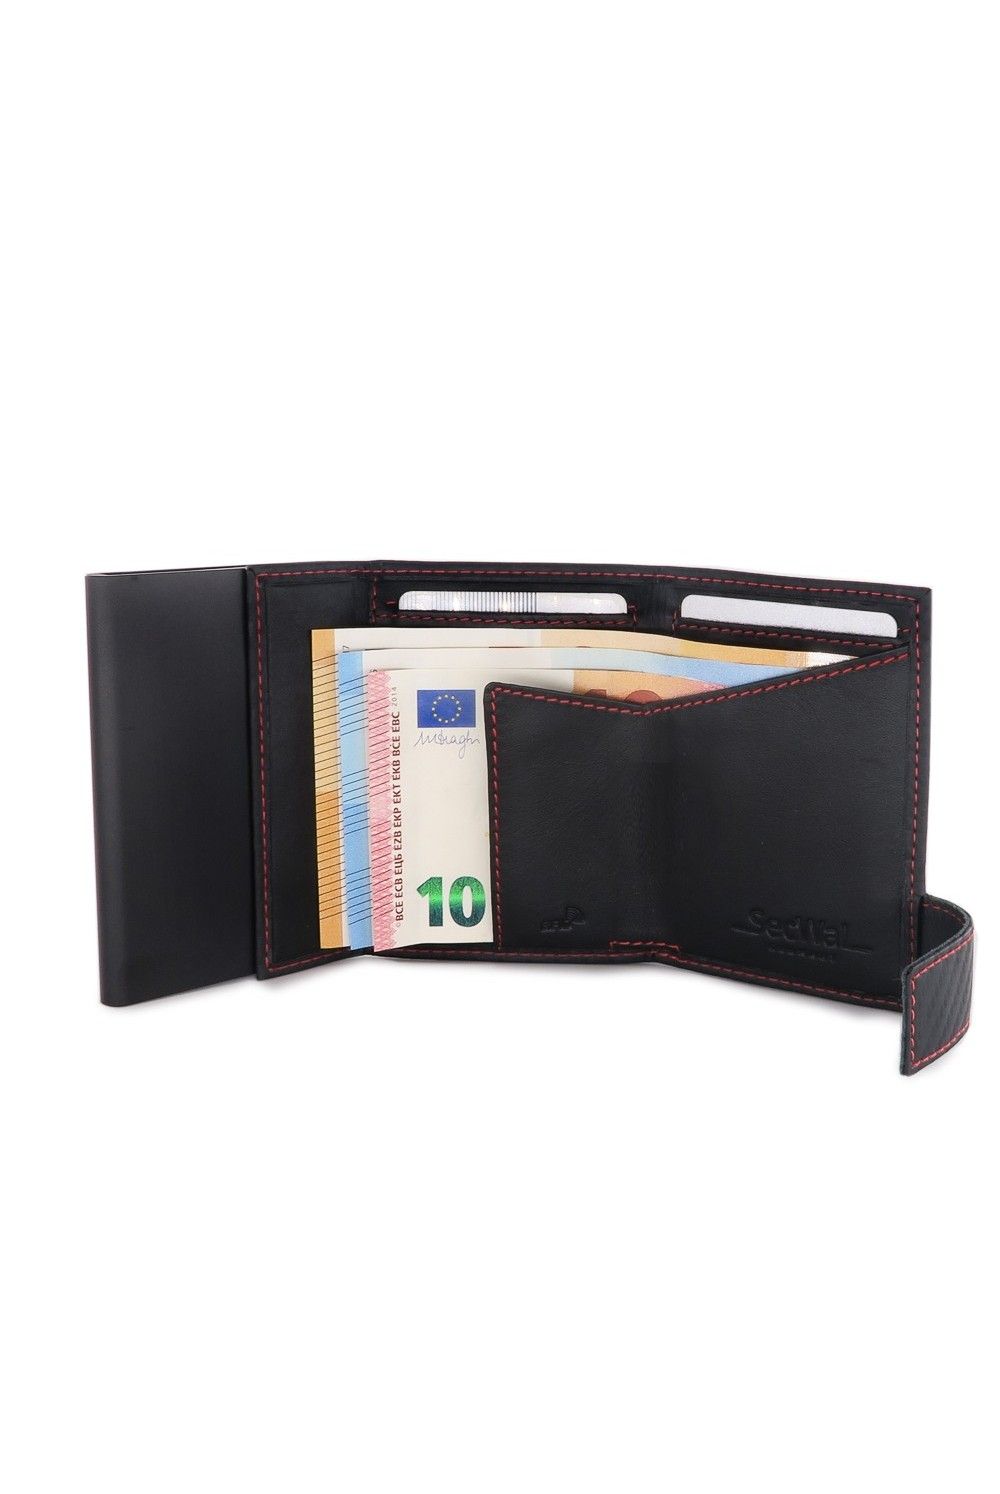 SecWal Card Case DK Leather Carbon Black-Red